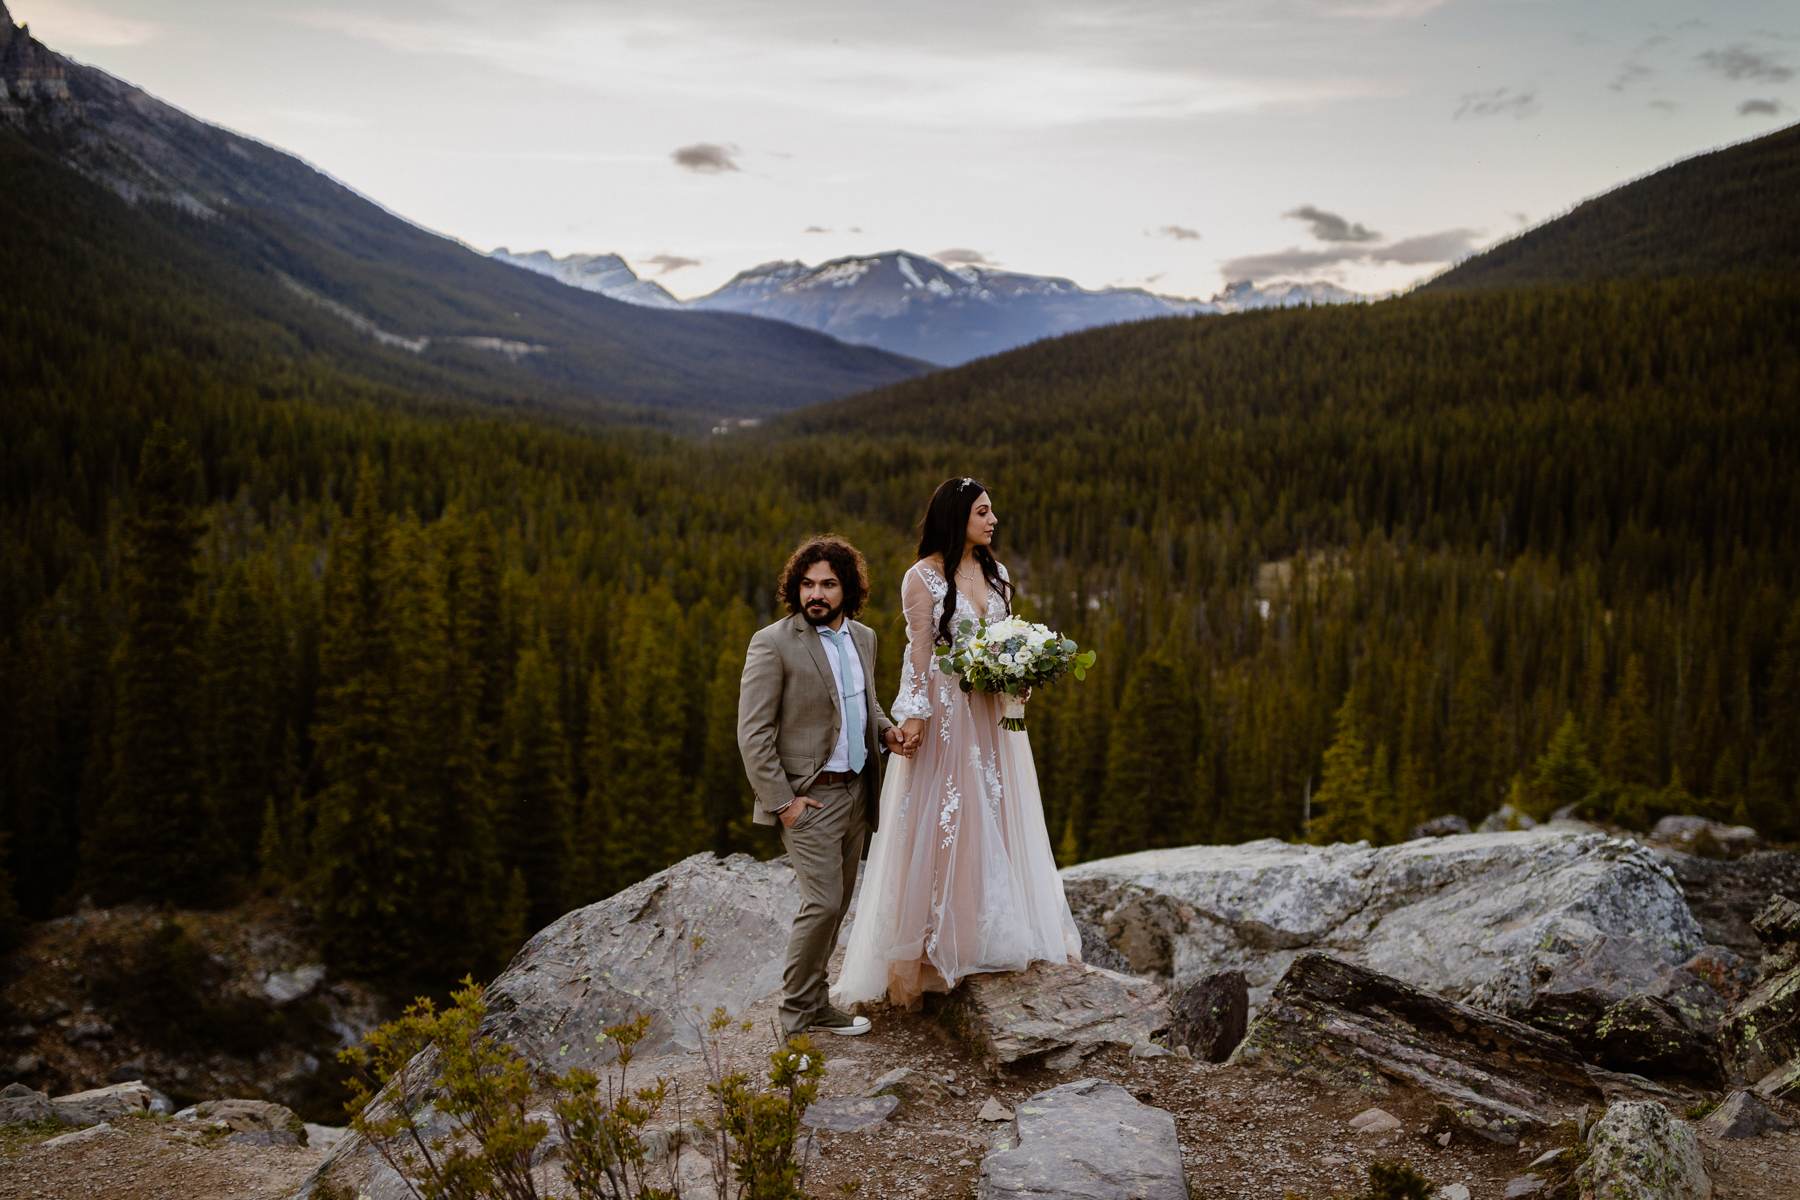 Canmore Elopement Photographers - Image 41